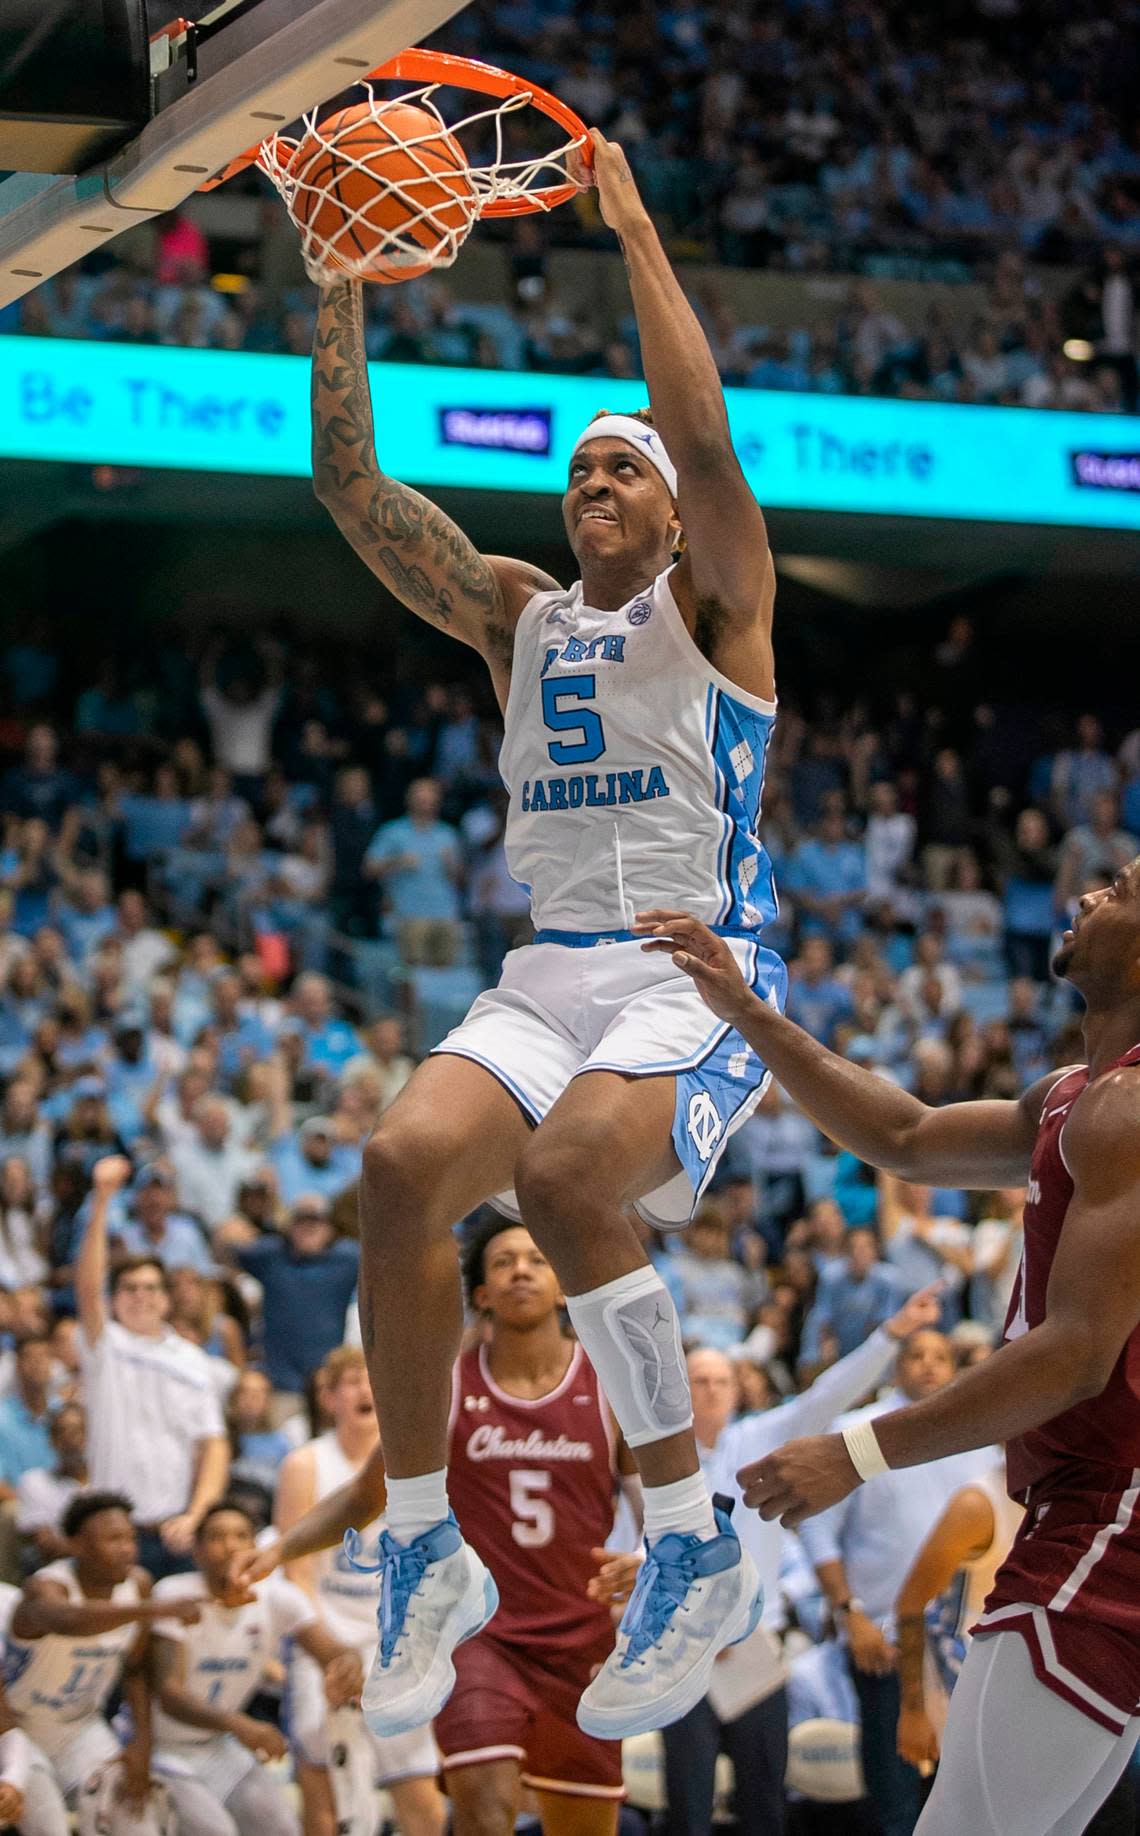 North Carolina’s Armando Bacot (5) dunks over College of Charleston’s Jaylon Scott (21) in the second half on Friday, November 11, 2022 at the Smith Center in Chapel Hill, N.C. Bacot lead all scores with 28 points in the Tar Heels’ 102-86 victory.